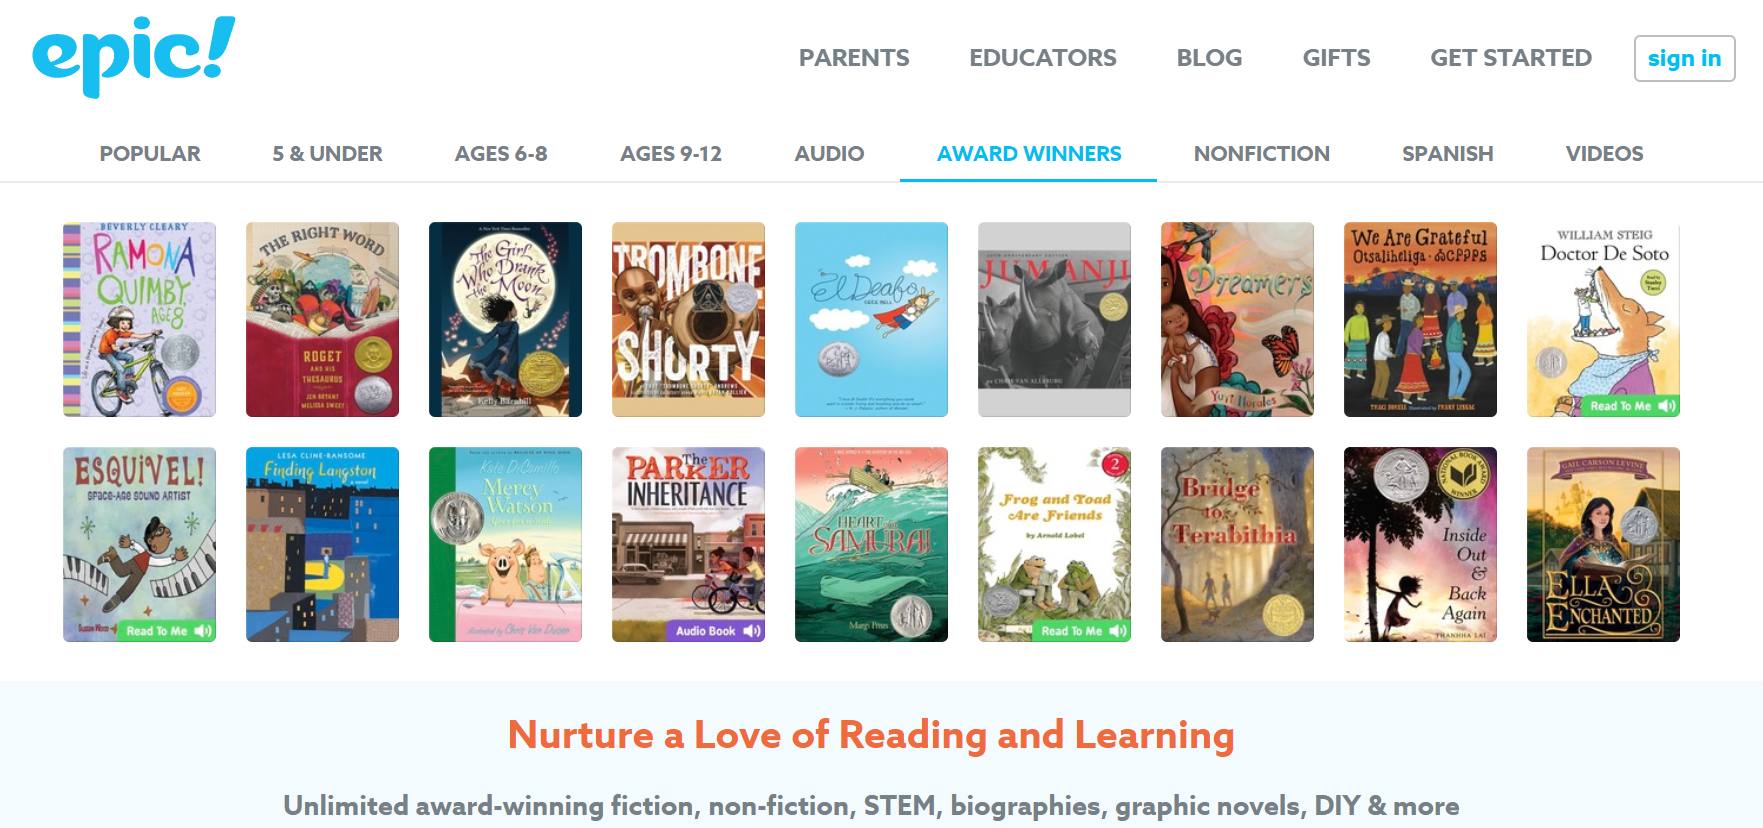 Epic Books For Kids Why We Love This Digital Library For Children